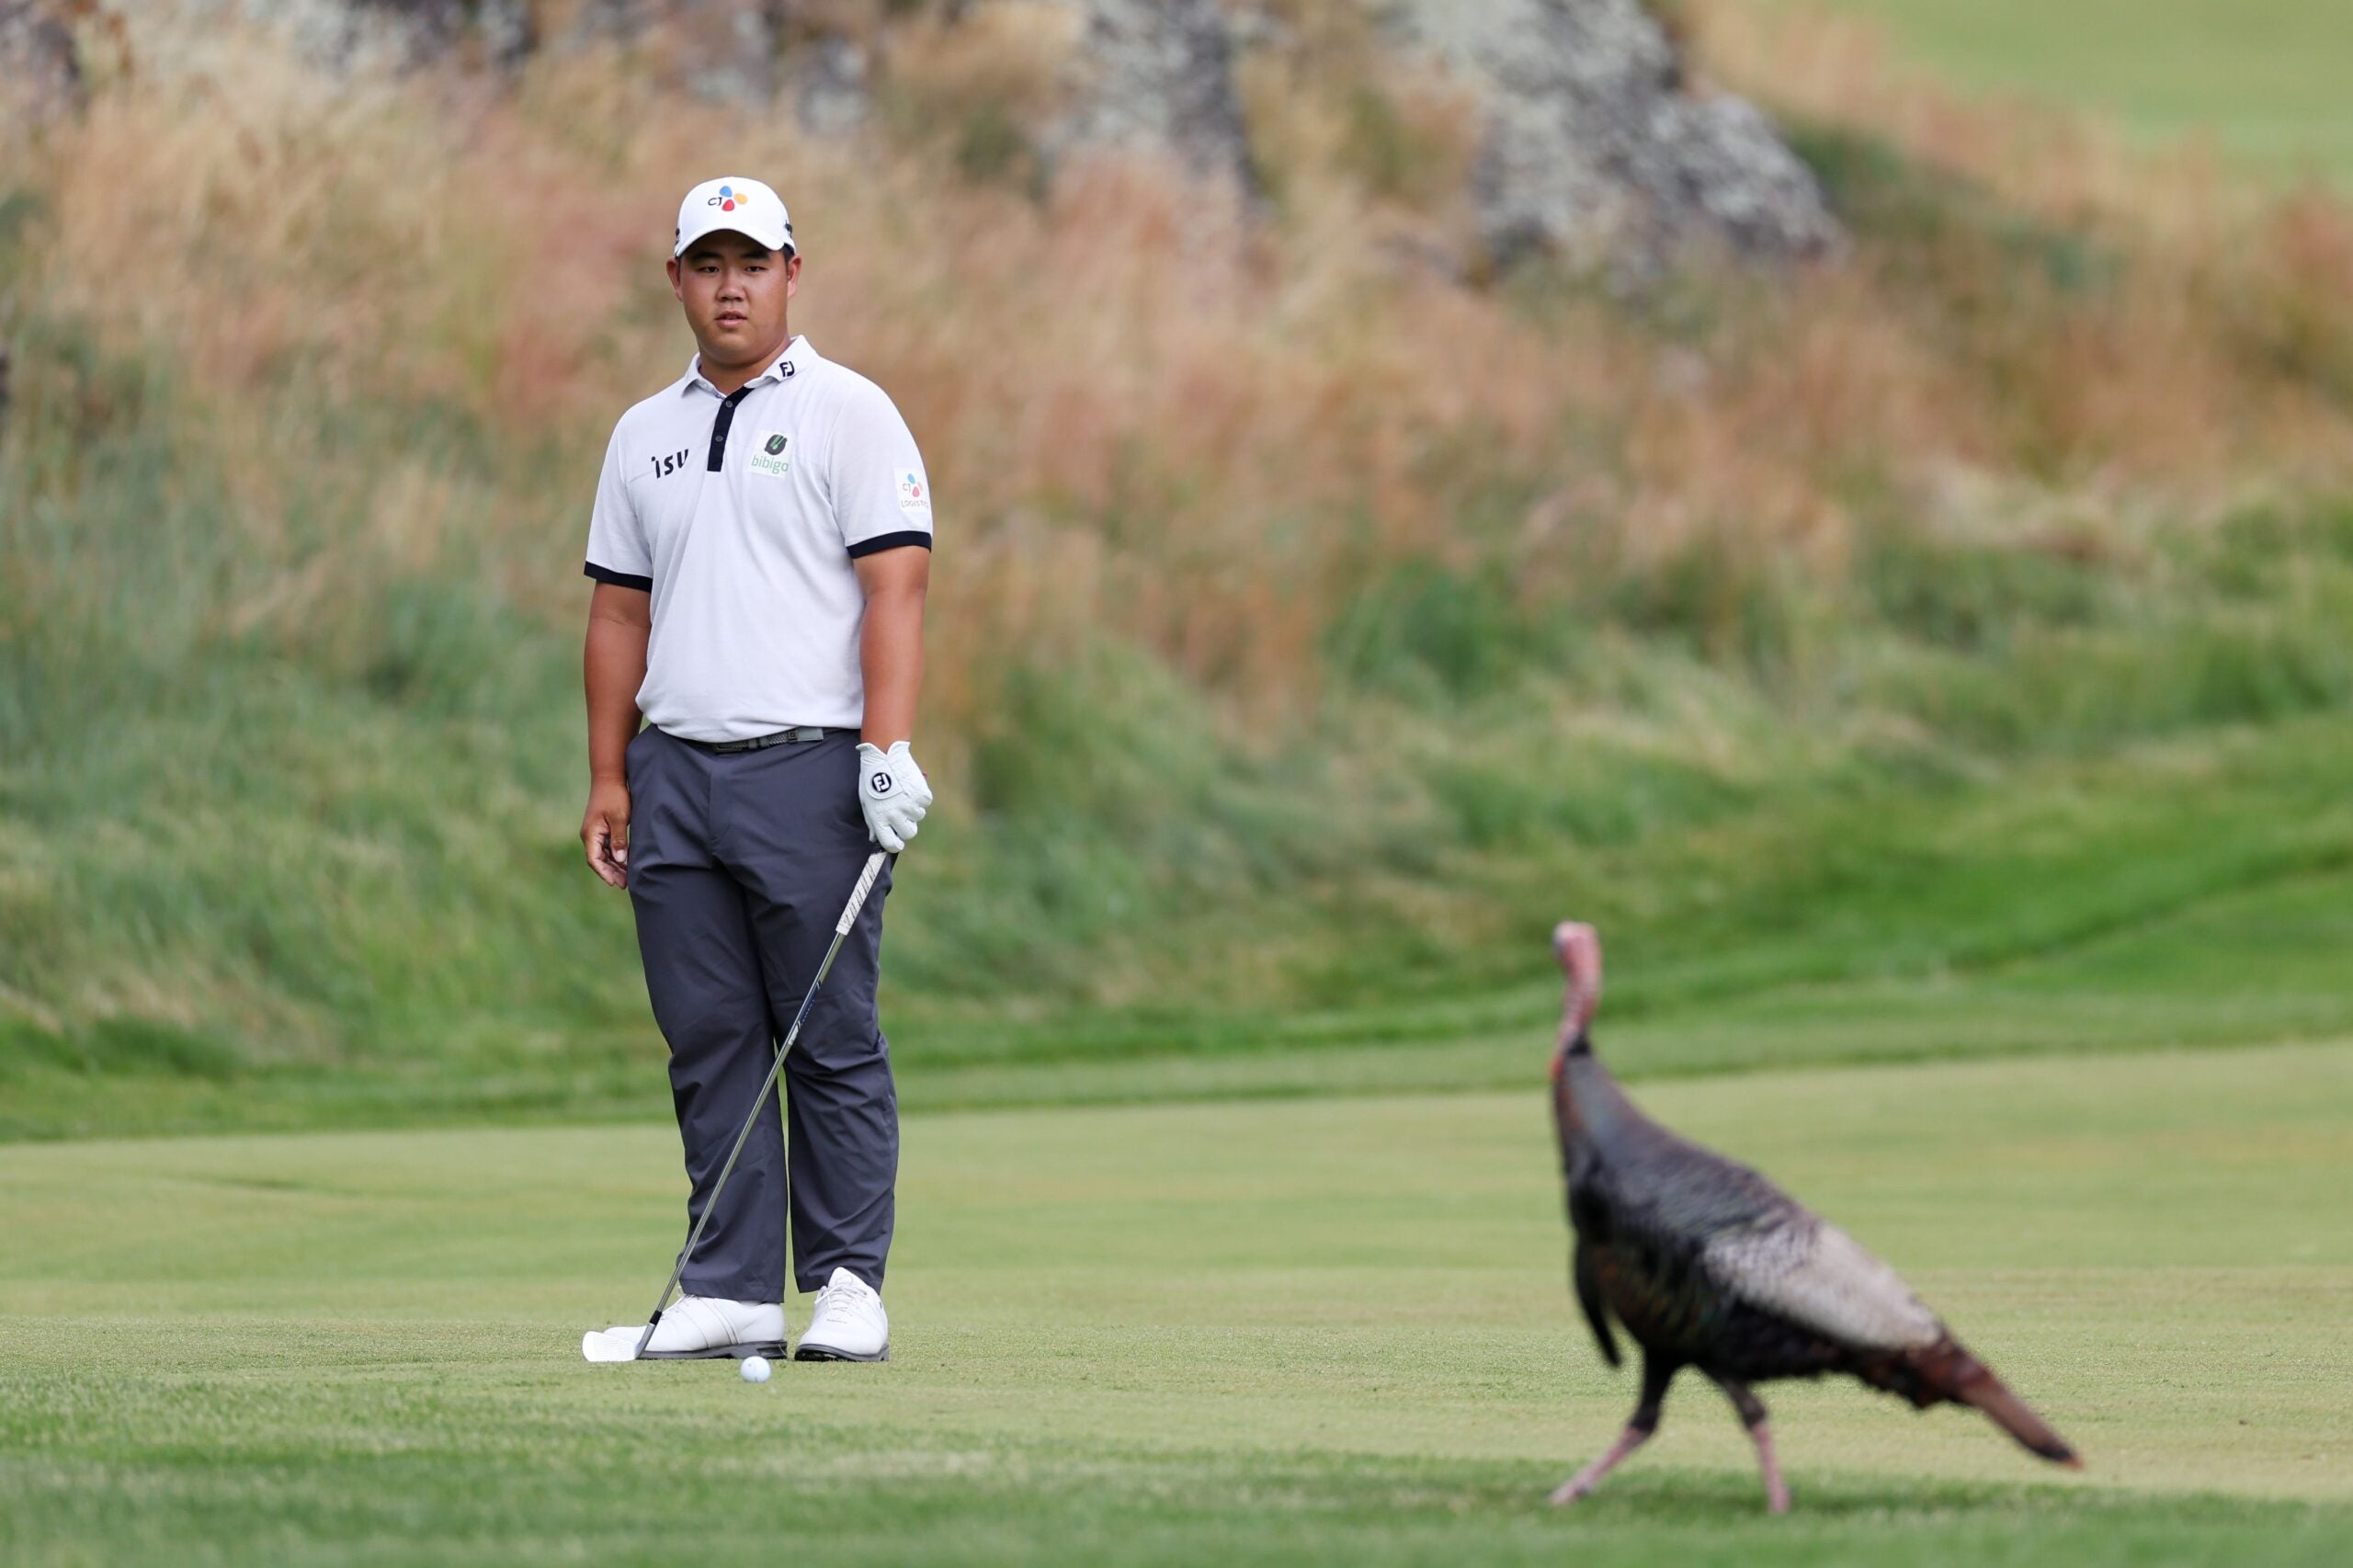 Turkey makes its way onto course at US Open in Brookline